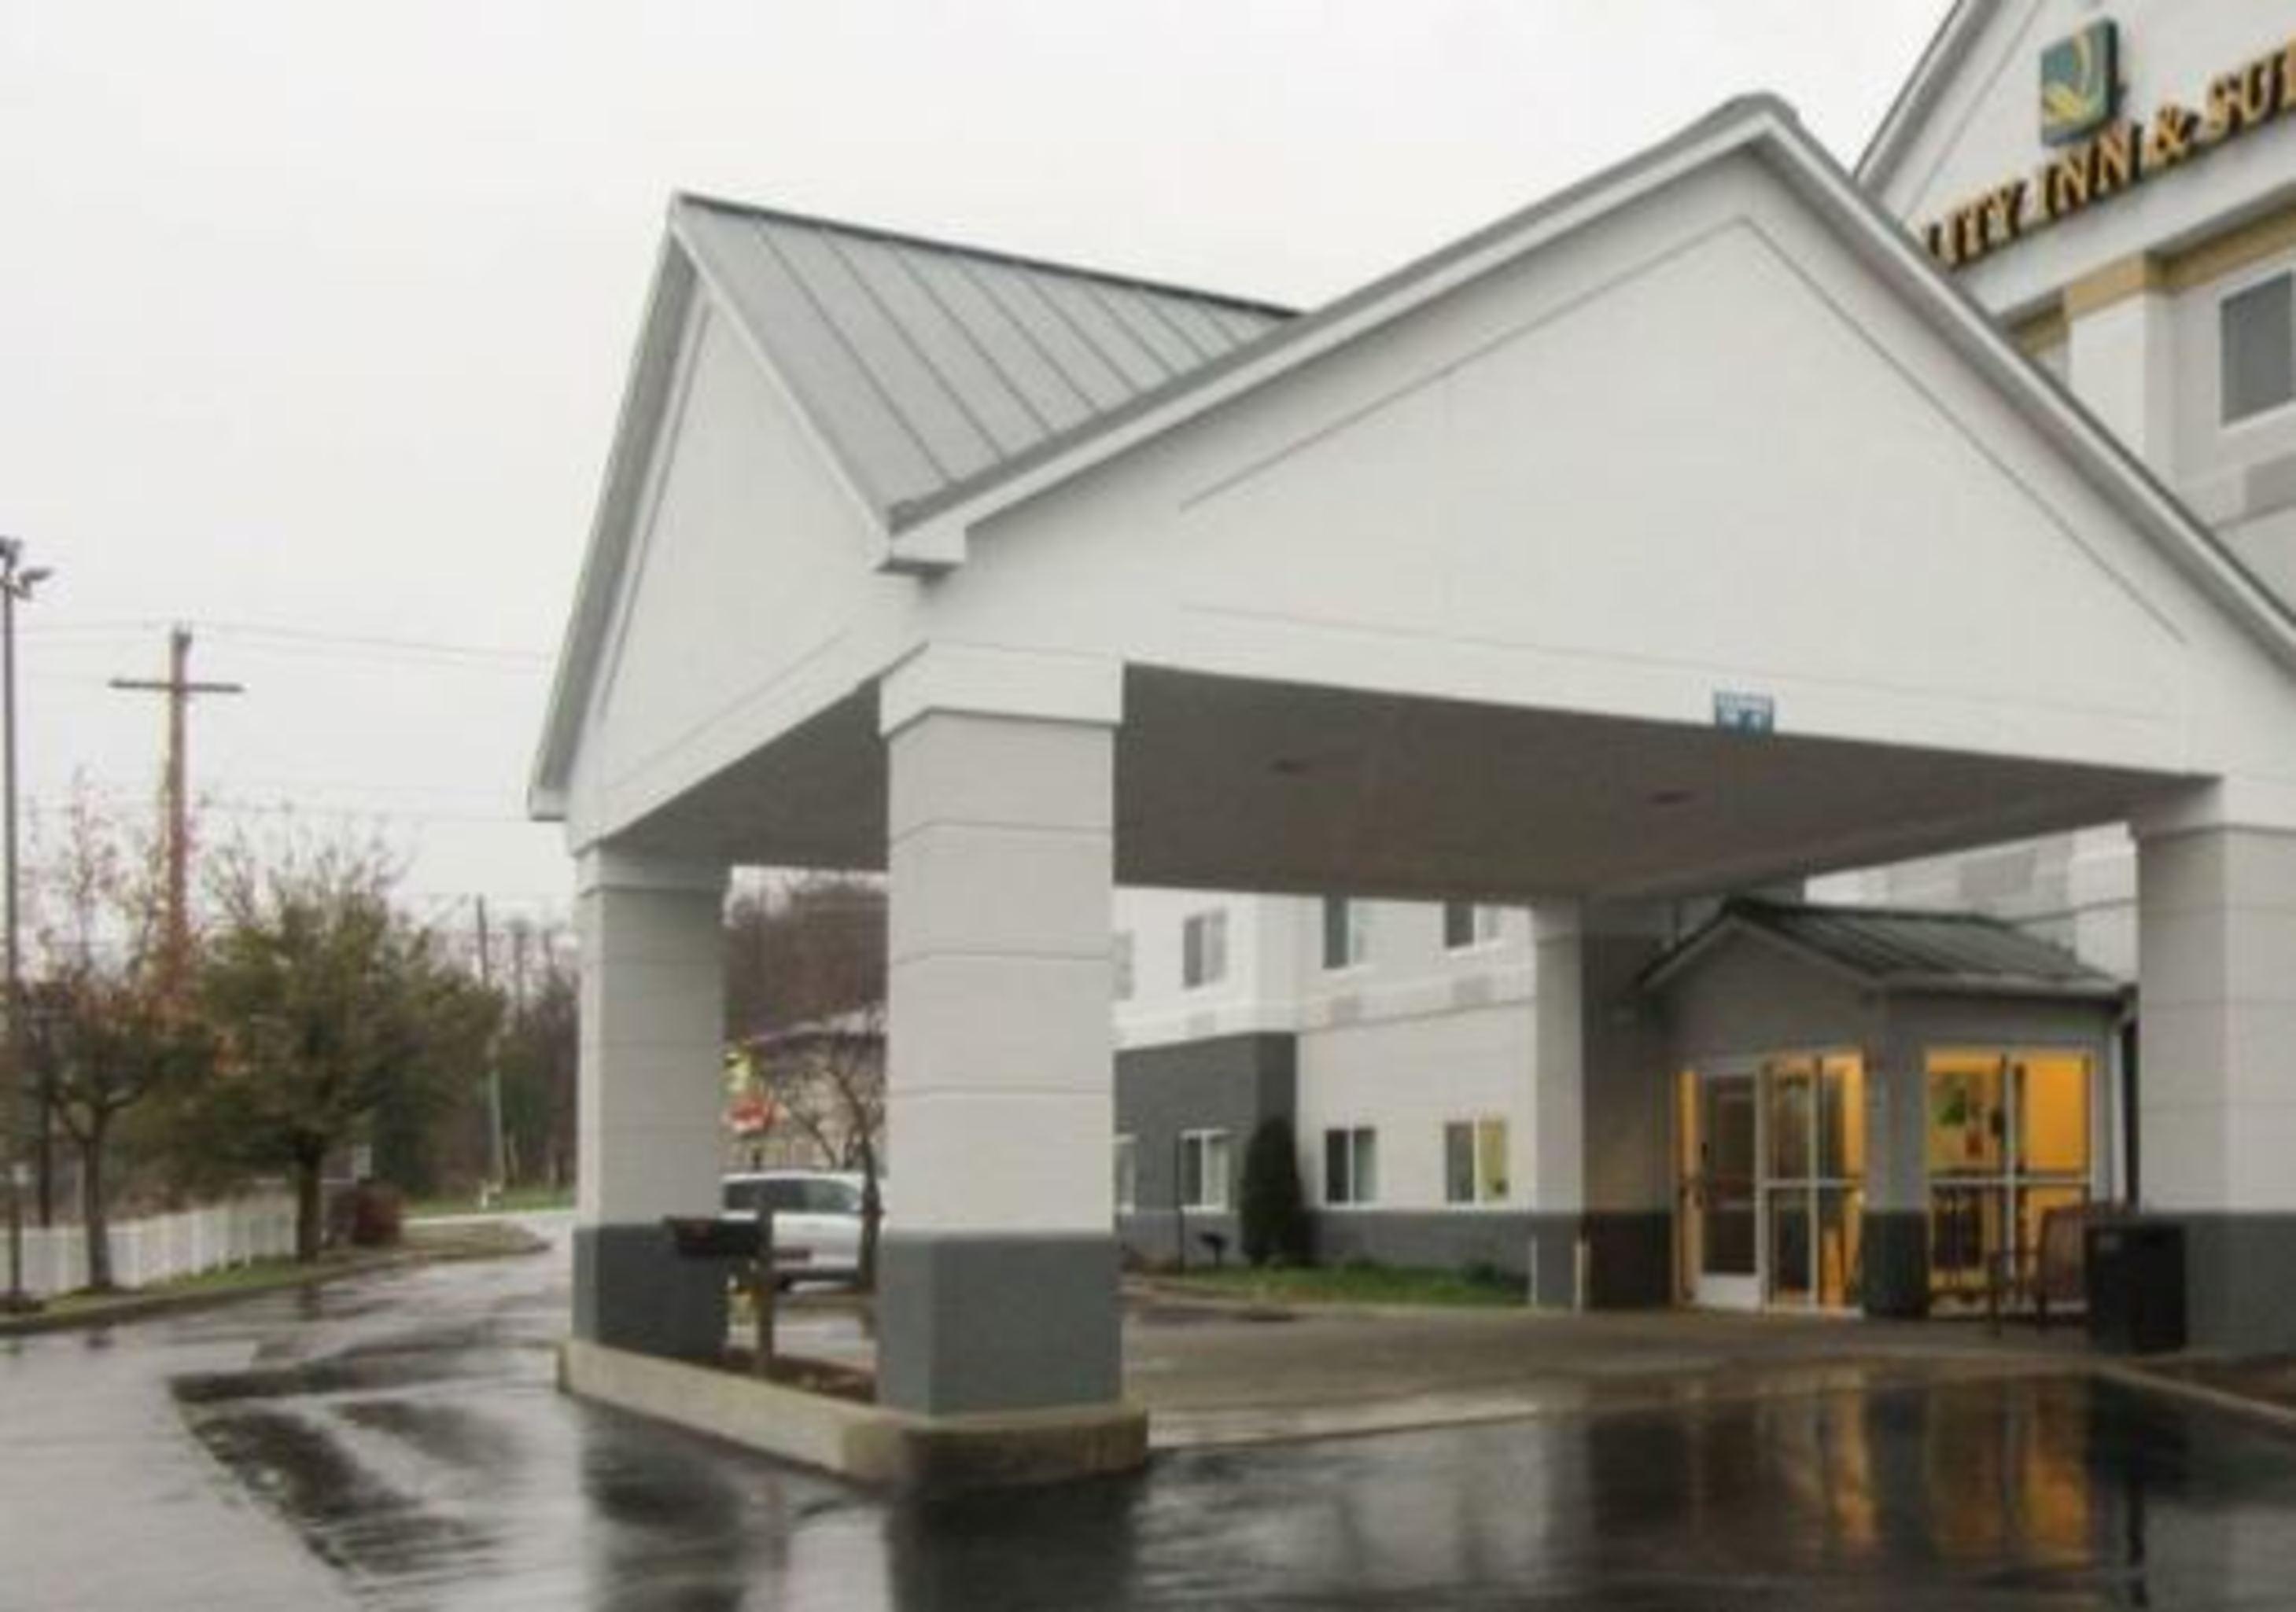 Wingate By Wyndham Uniontown Hotel Exterior photo